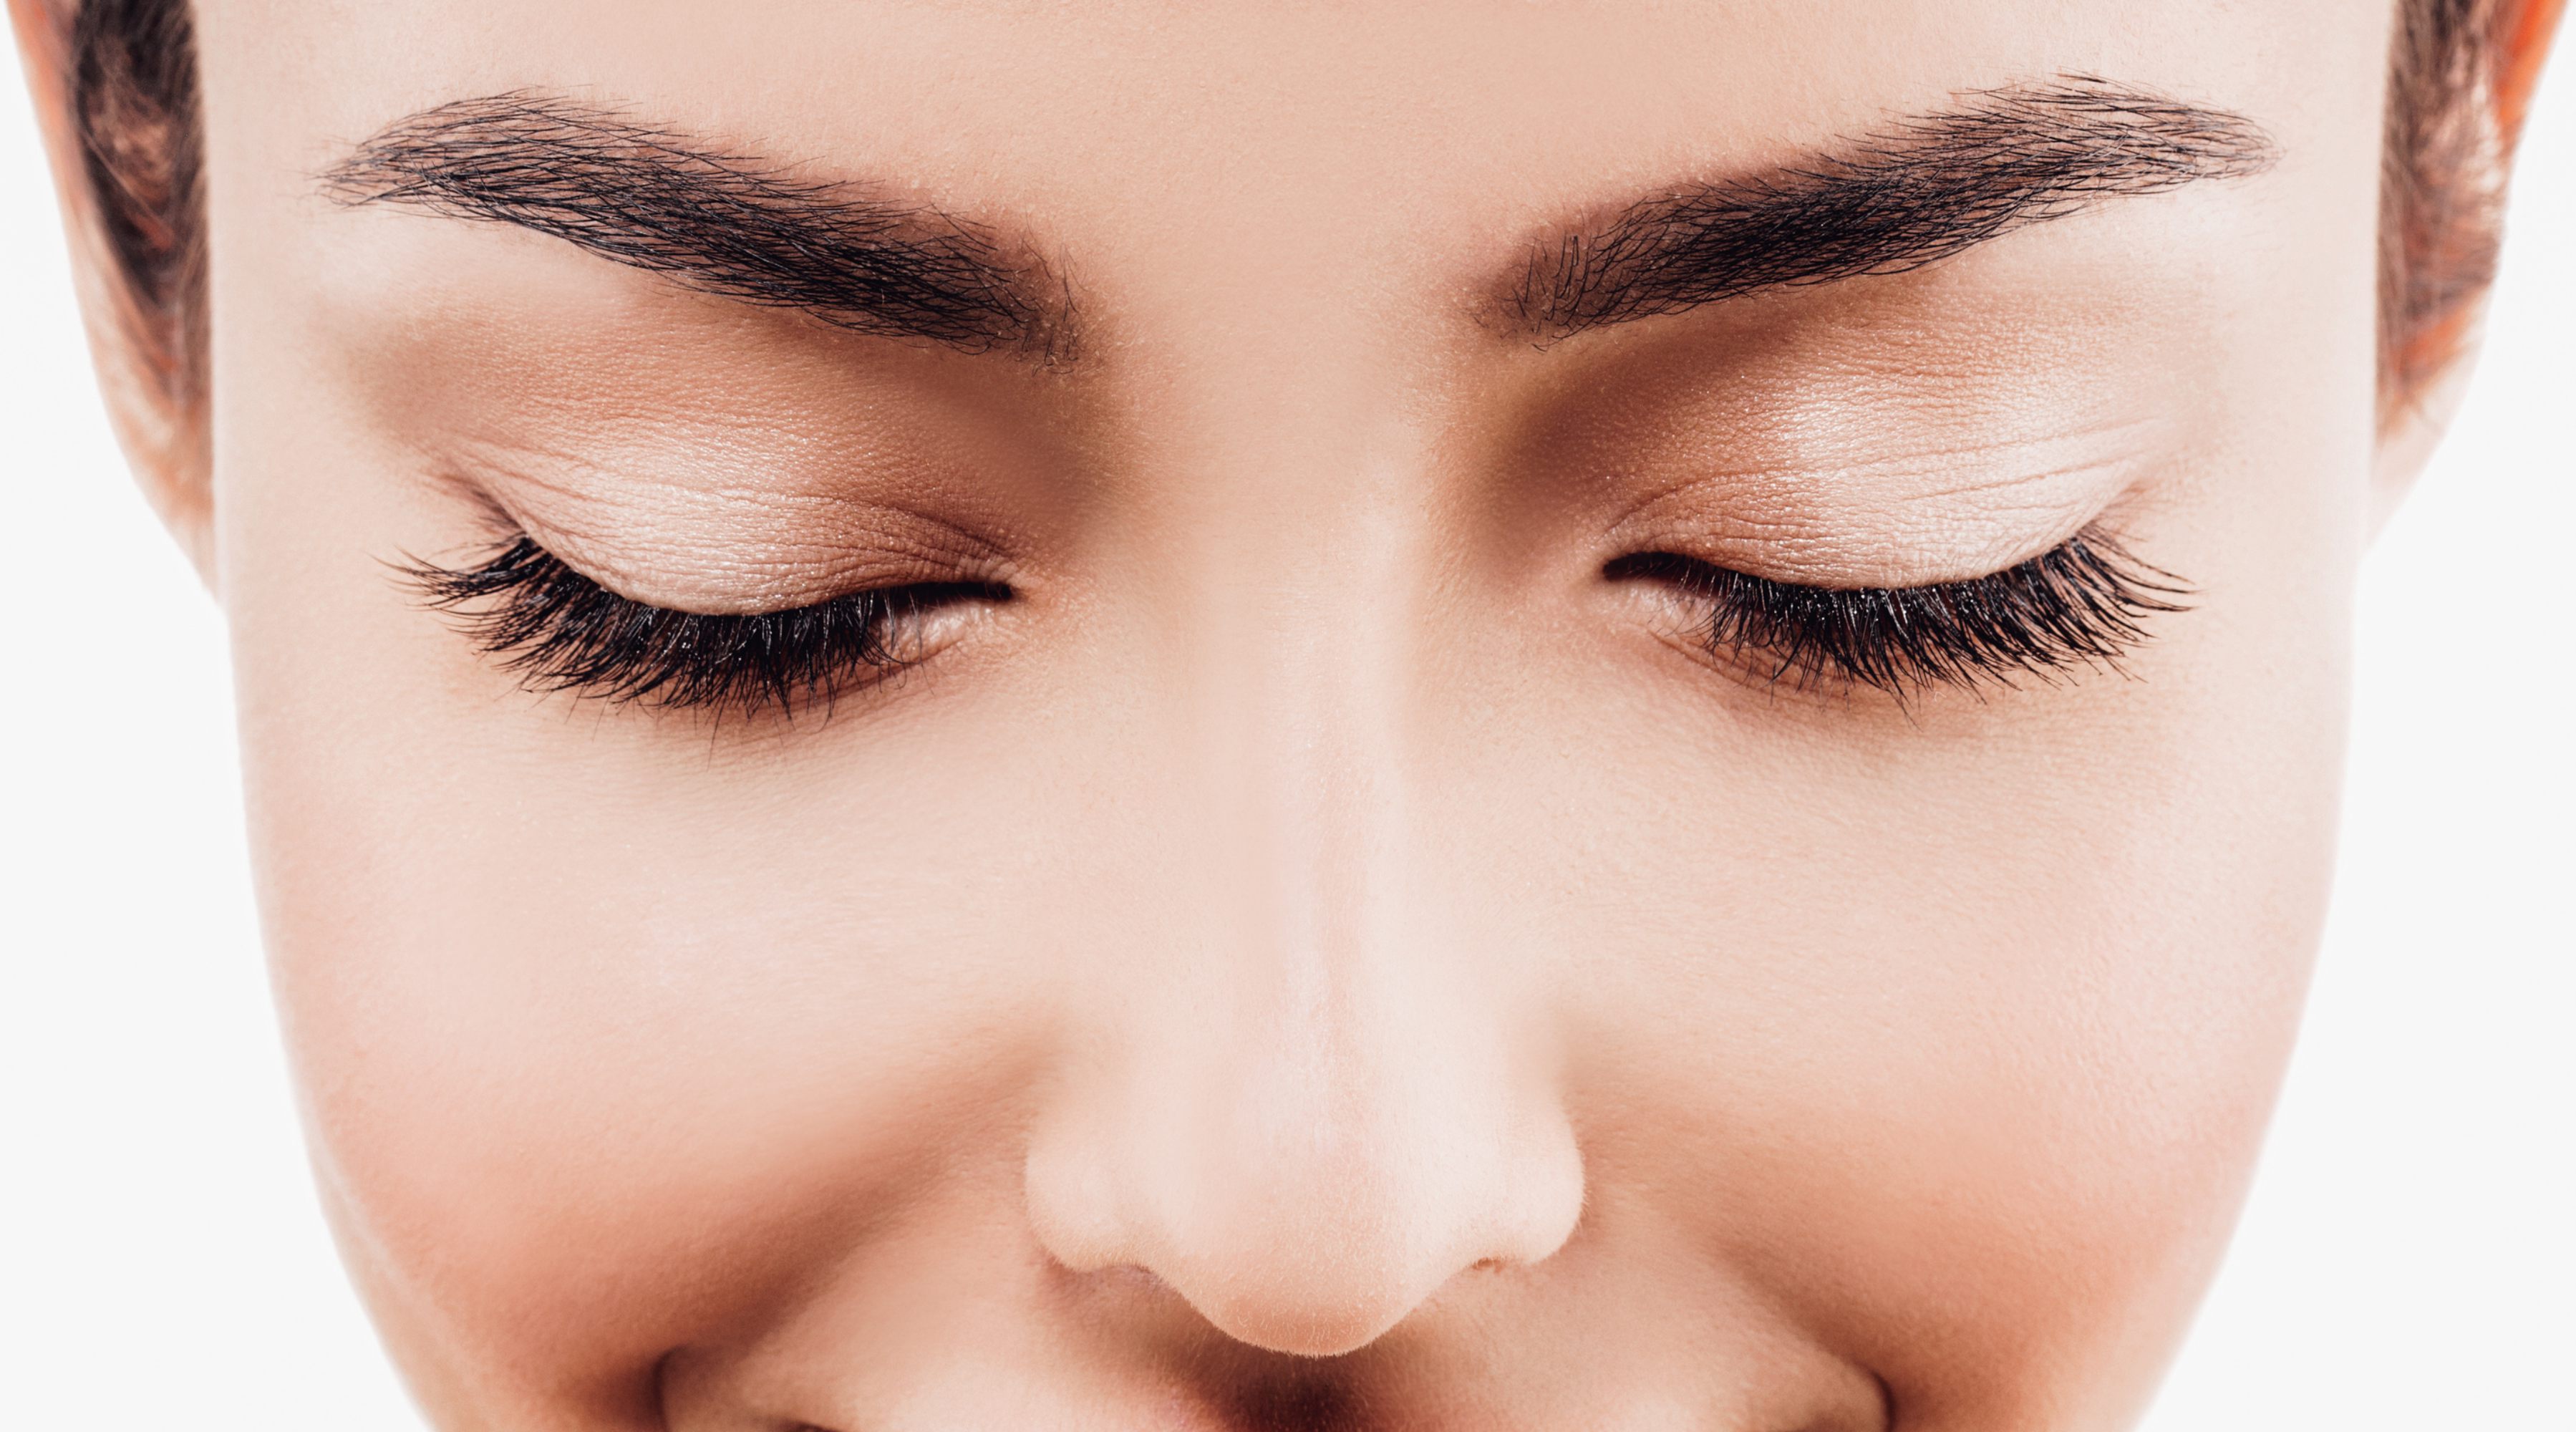 From trendy looks, here's how to achieve brows | Asia Hong Kong